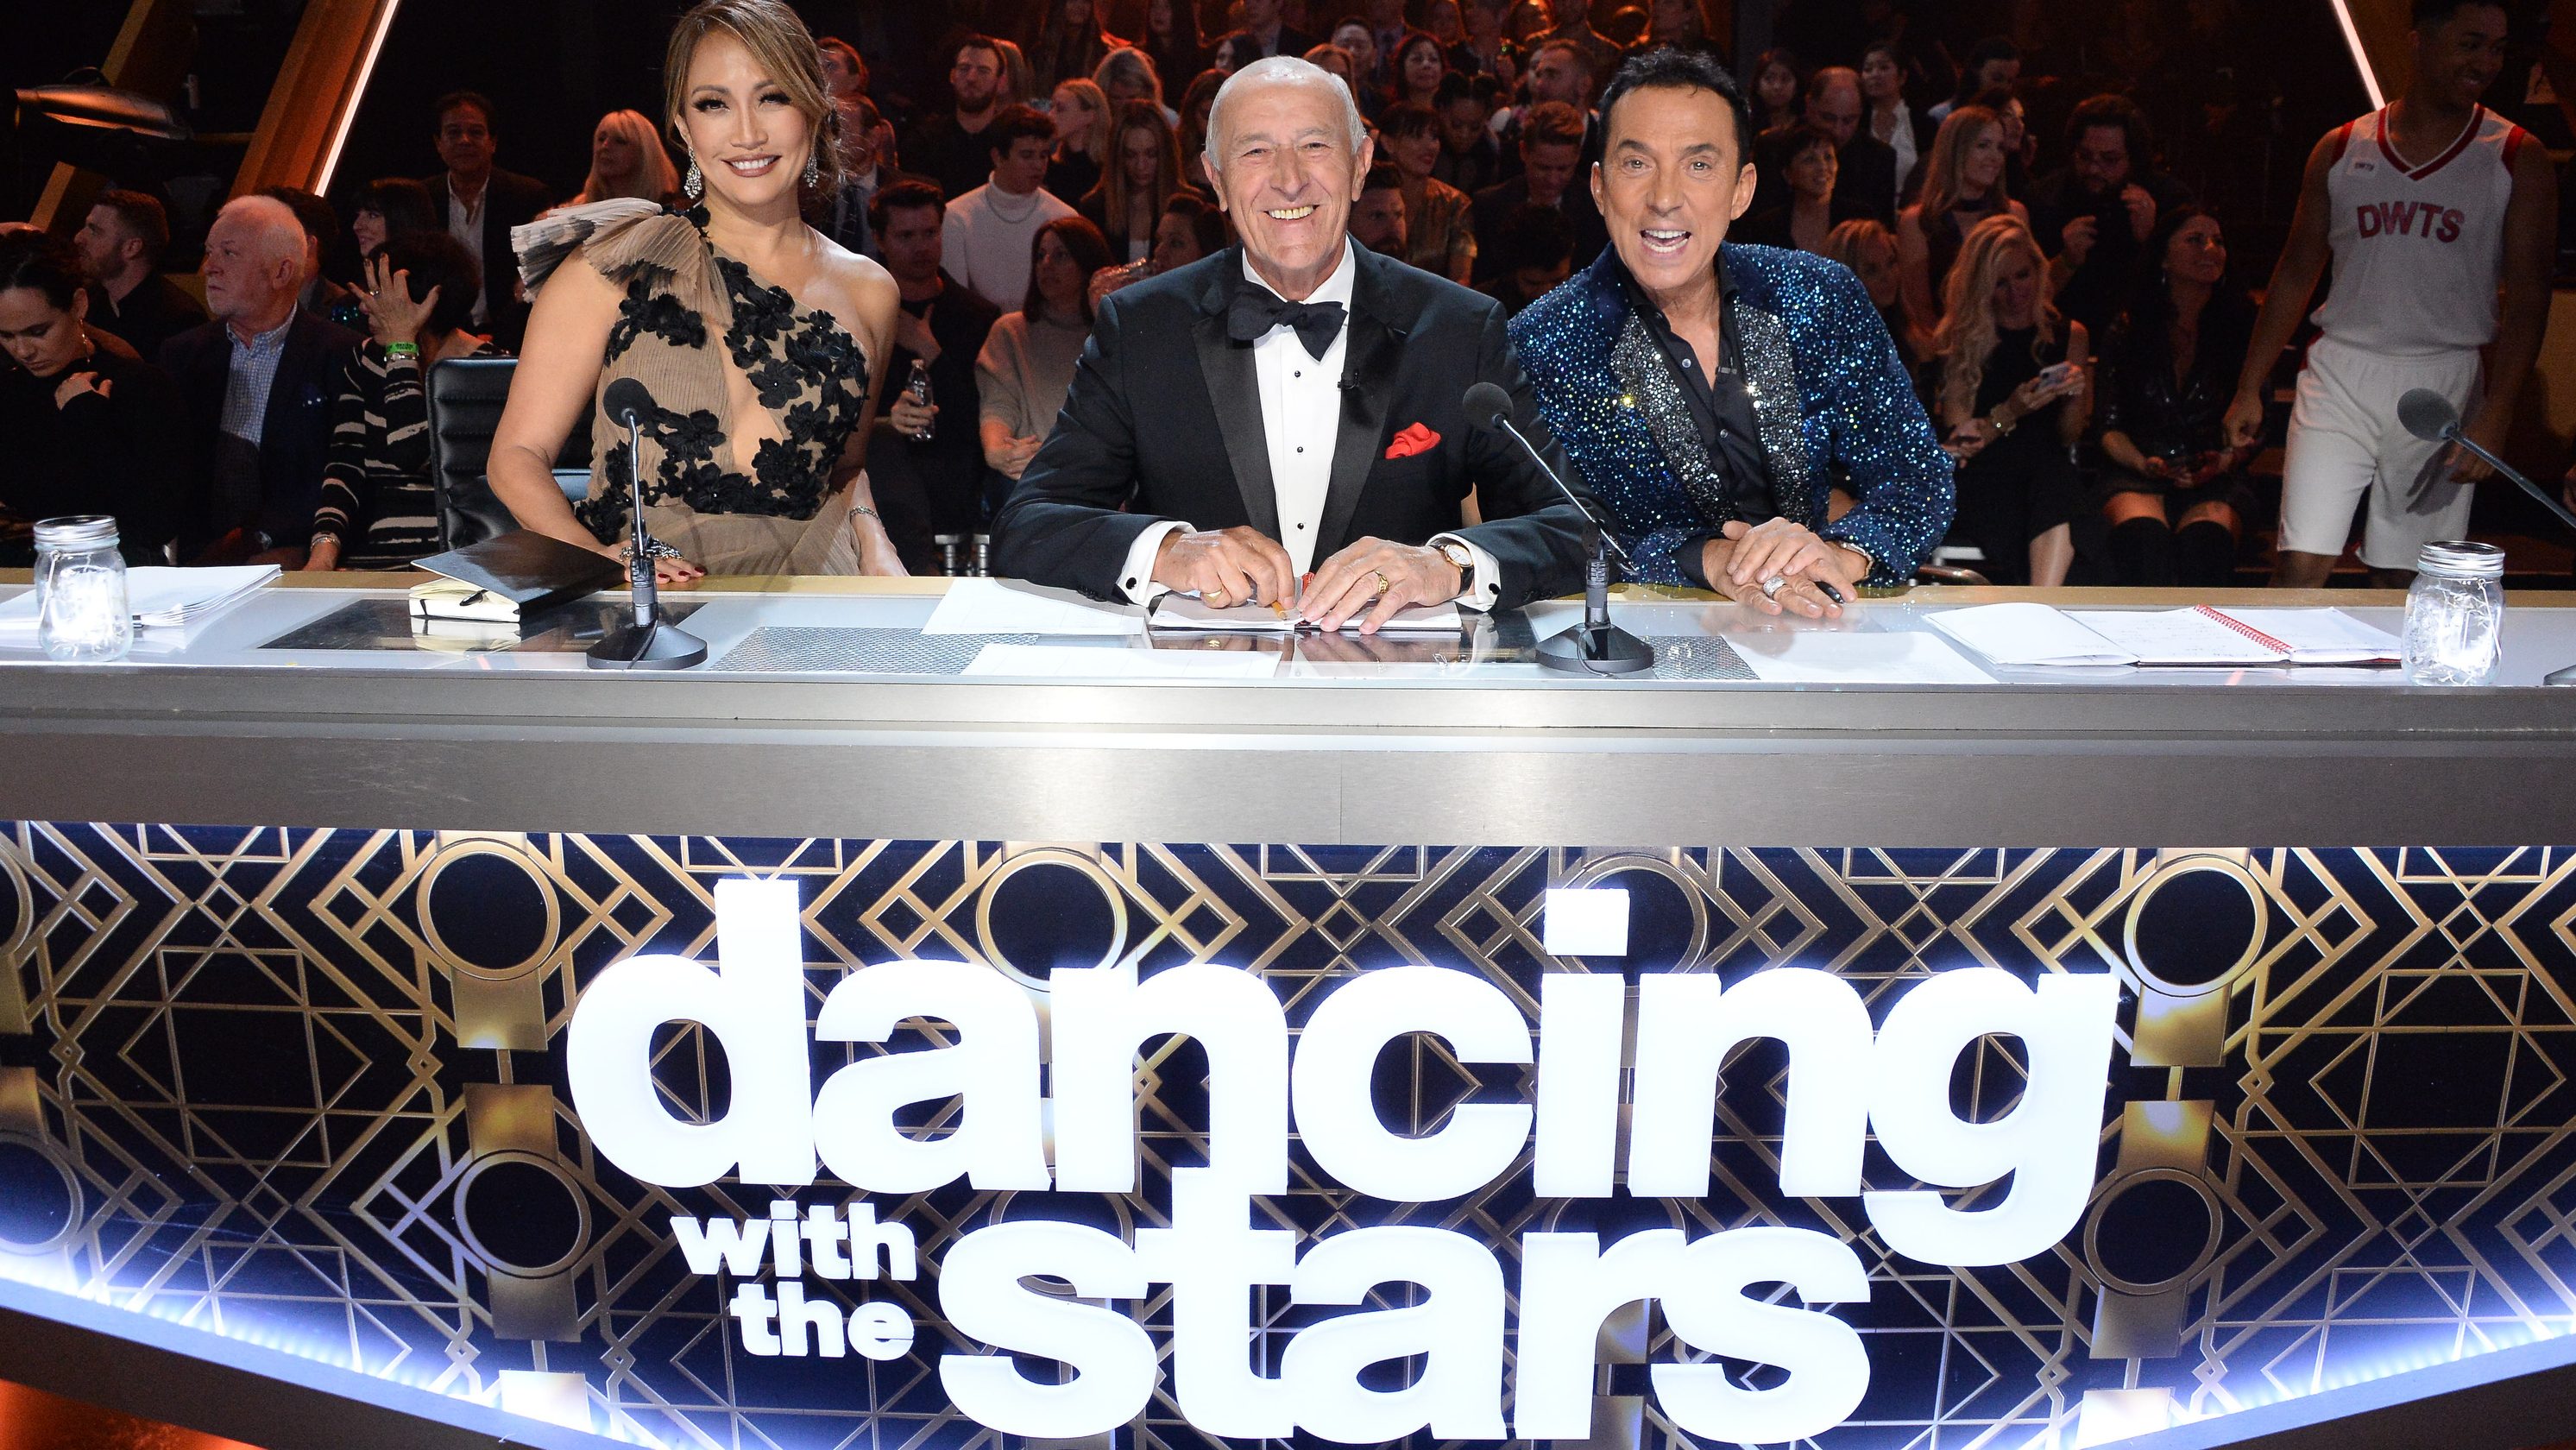 dancing with stars finalists 2021